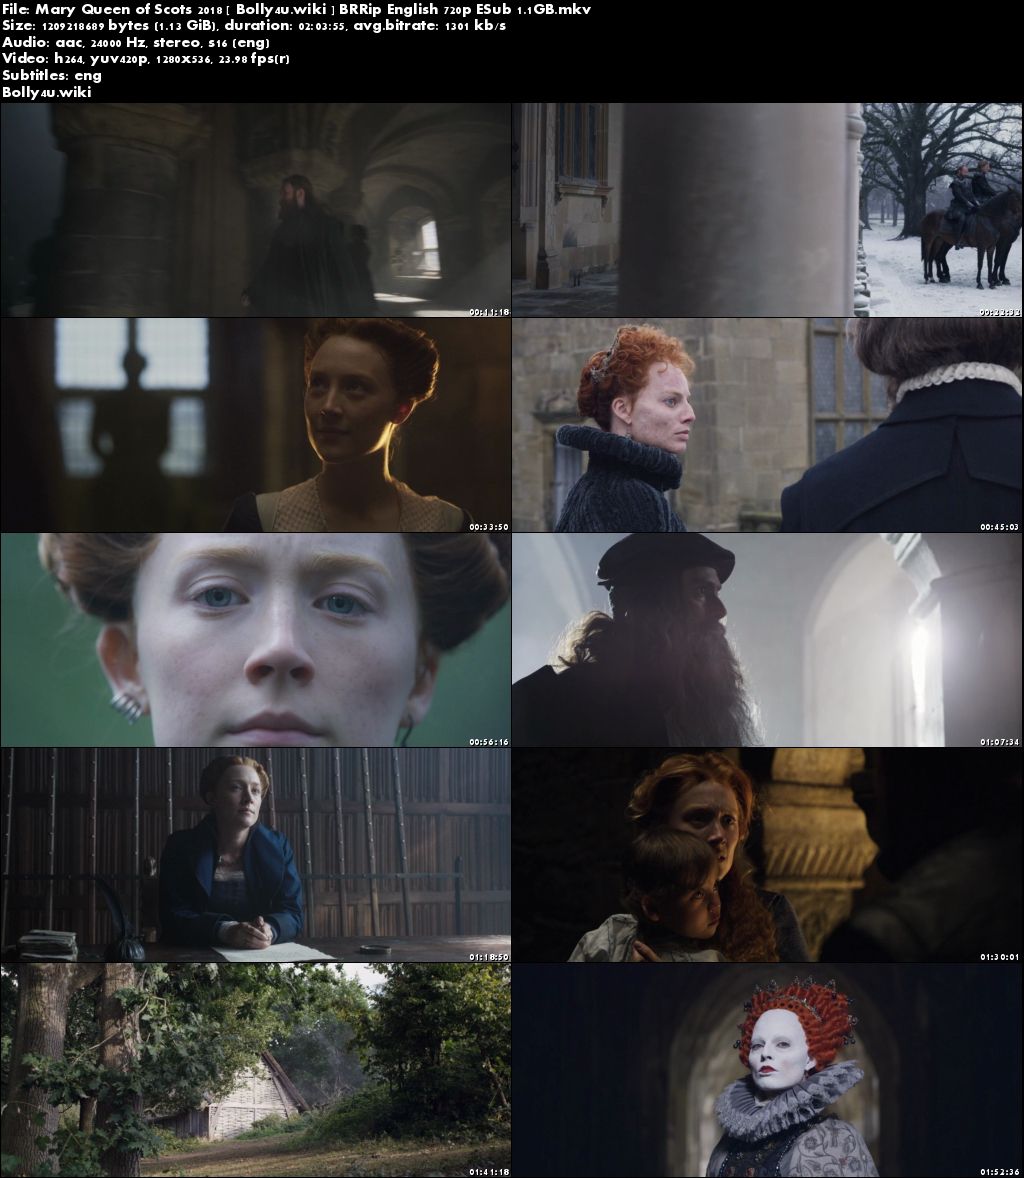 Mary Queen of Scots 2018 BRRip 1.1Gb English 720p ESub Download